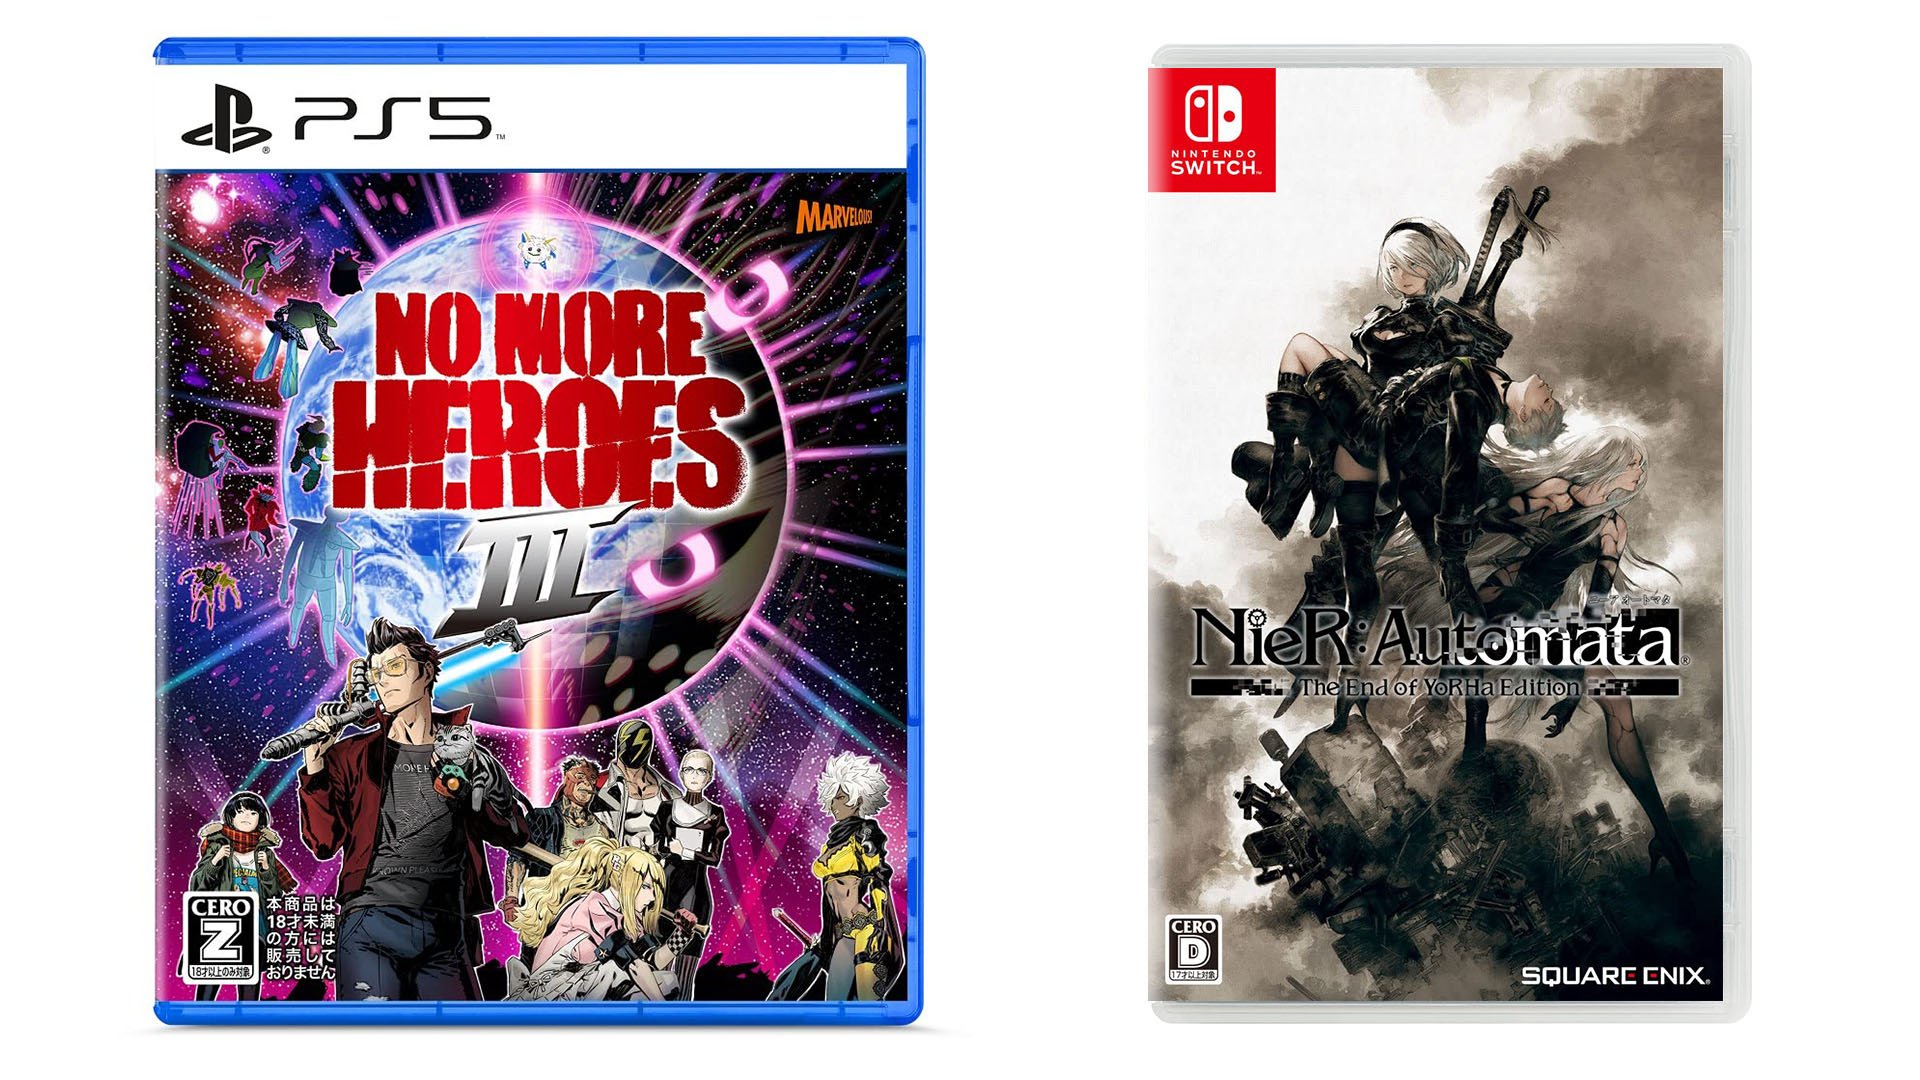 This week’s Japanese game releases: No More Heroes III, NieR: Automata The End of YoRHa Edition, more